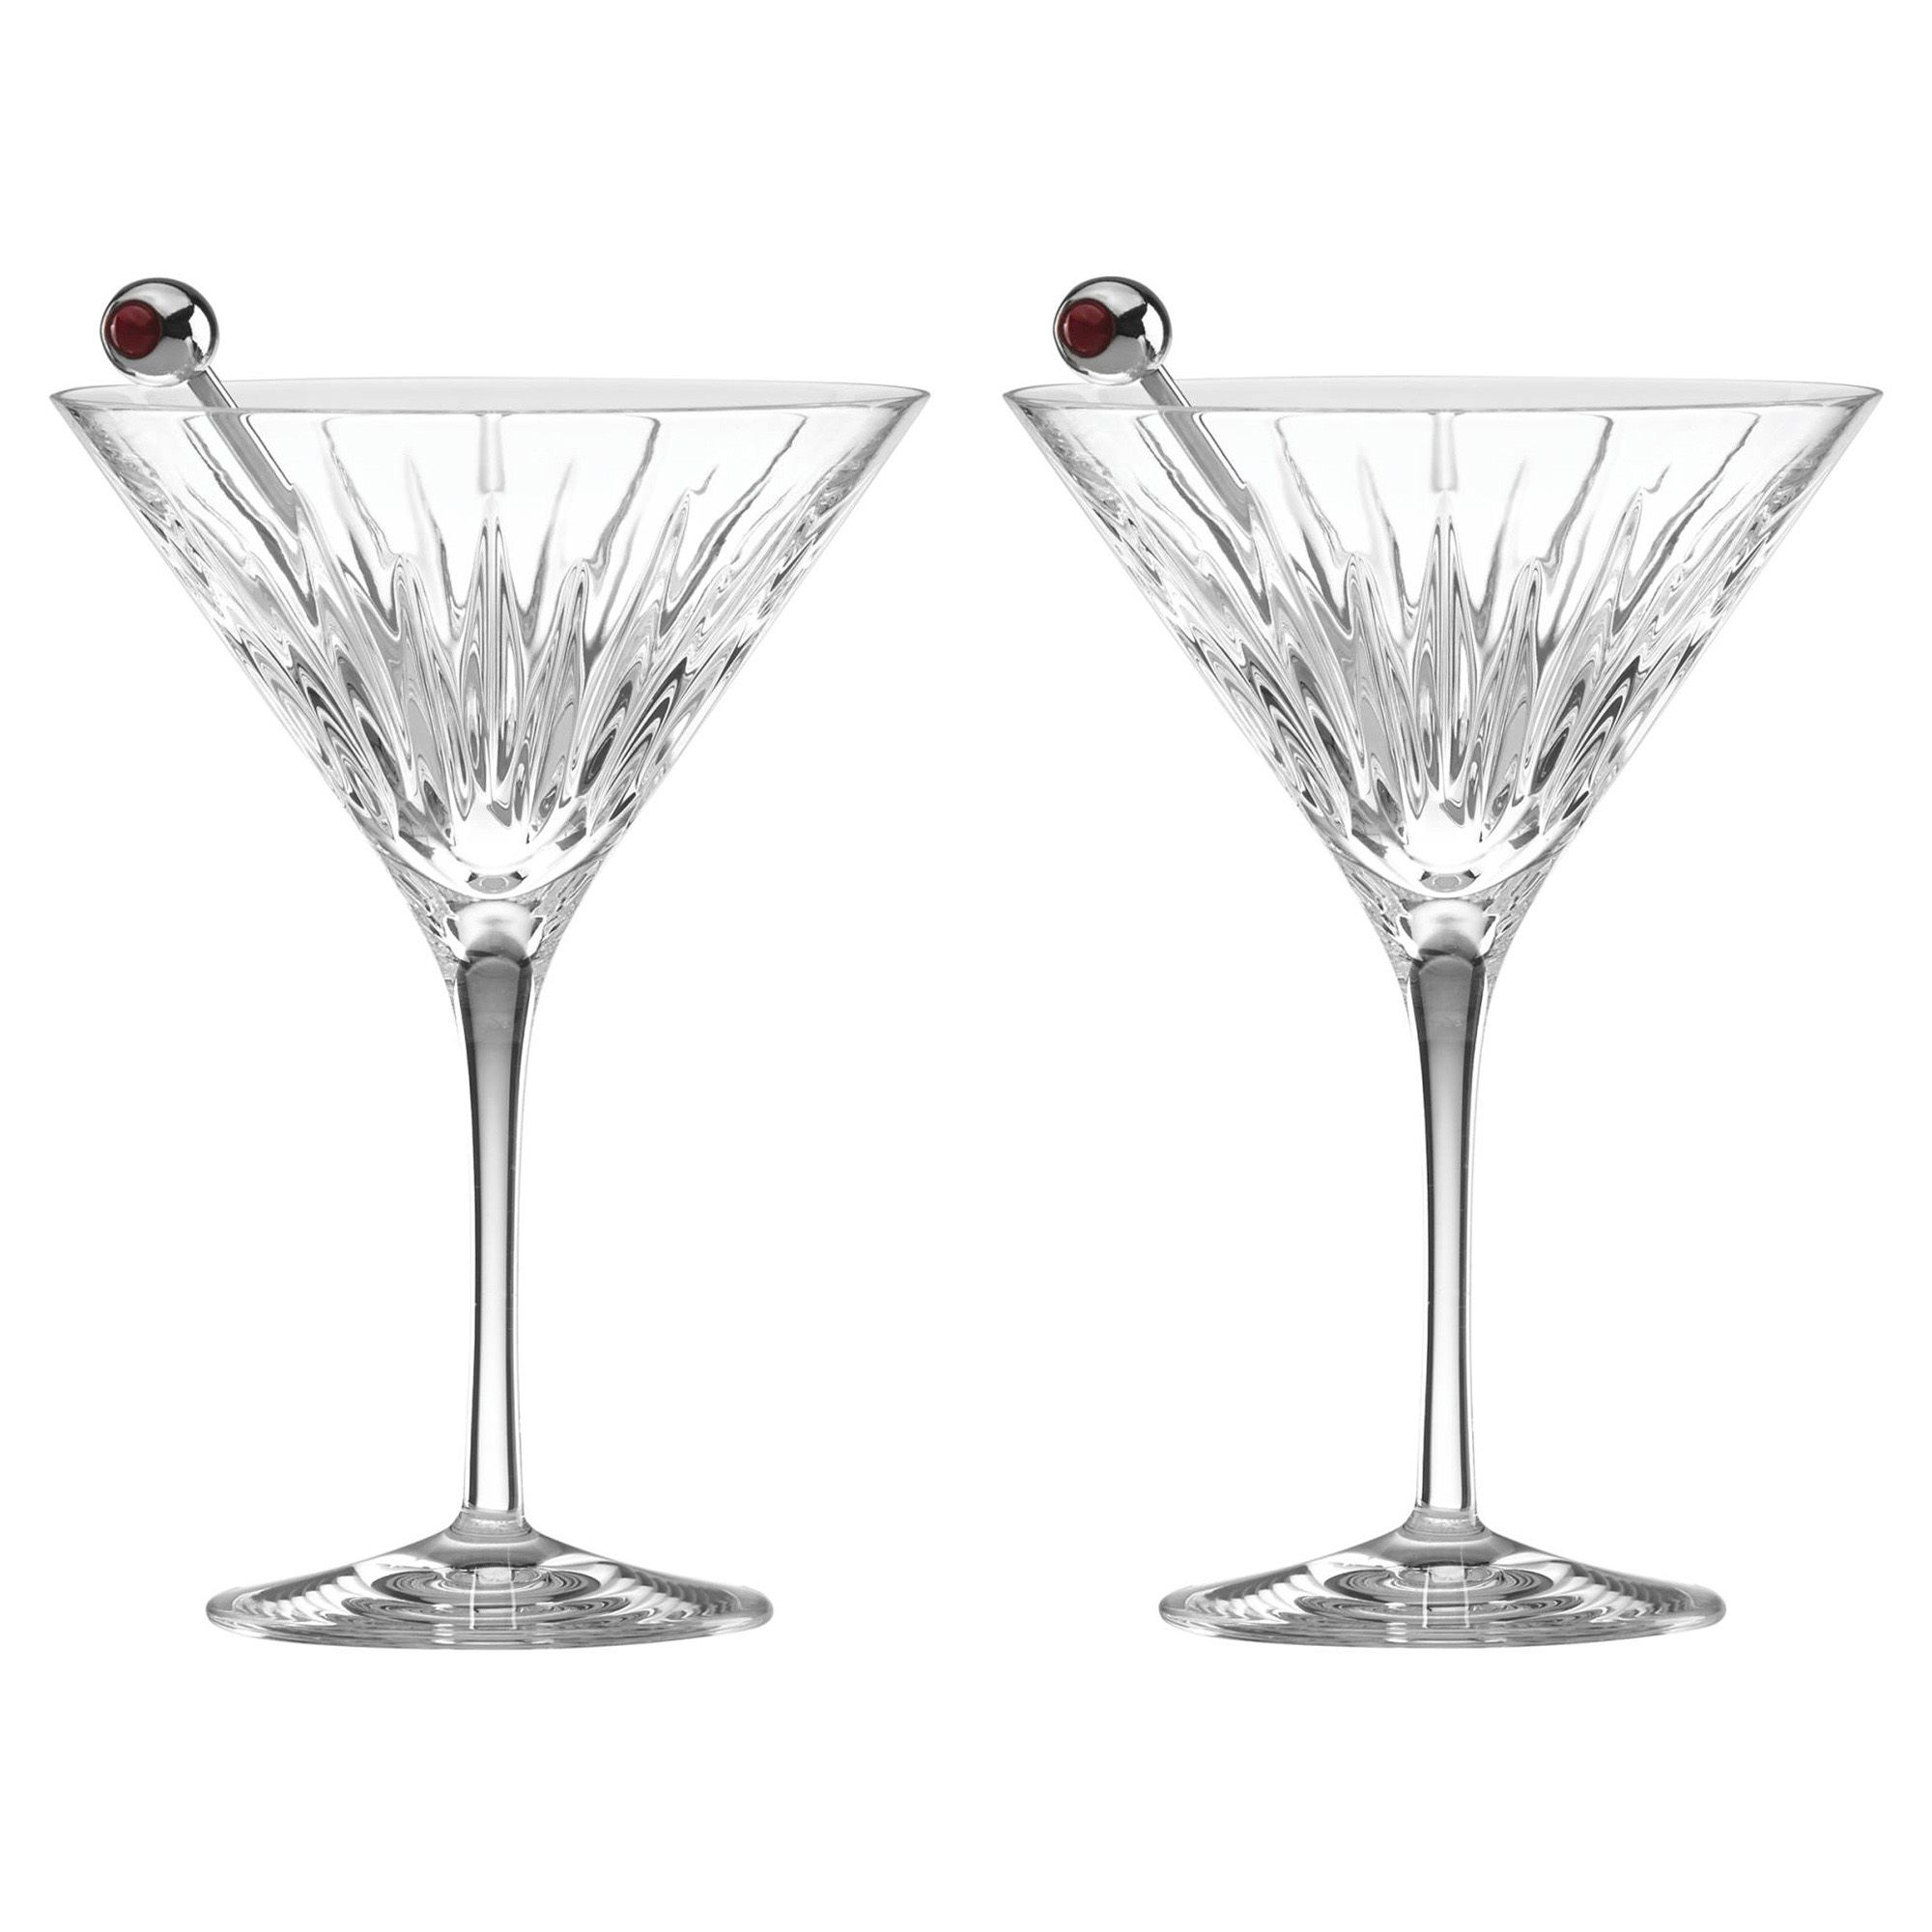 Lenox Reed & Barton Soho Clear Crystal Martini Glass with Olive Stirrer - Set of 2 | Kathy Kuo Home